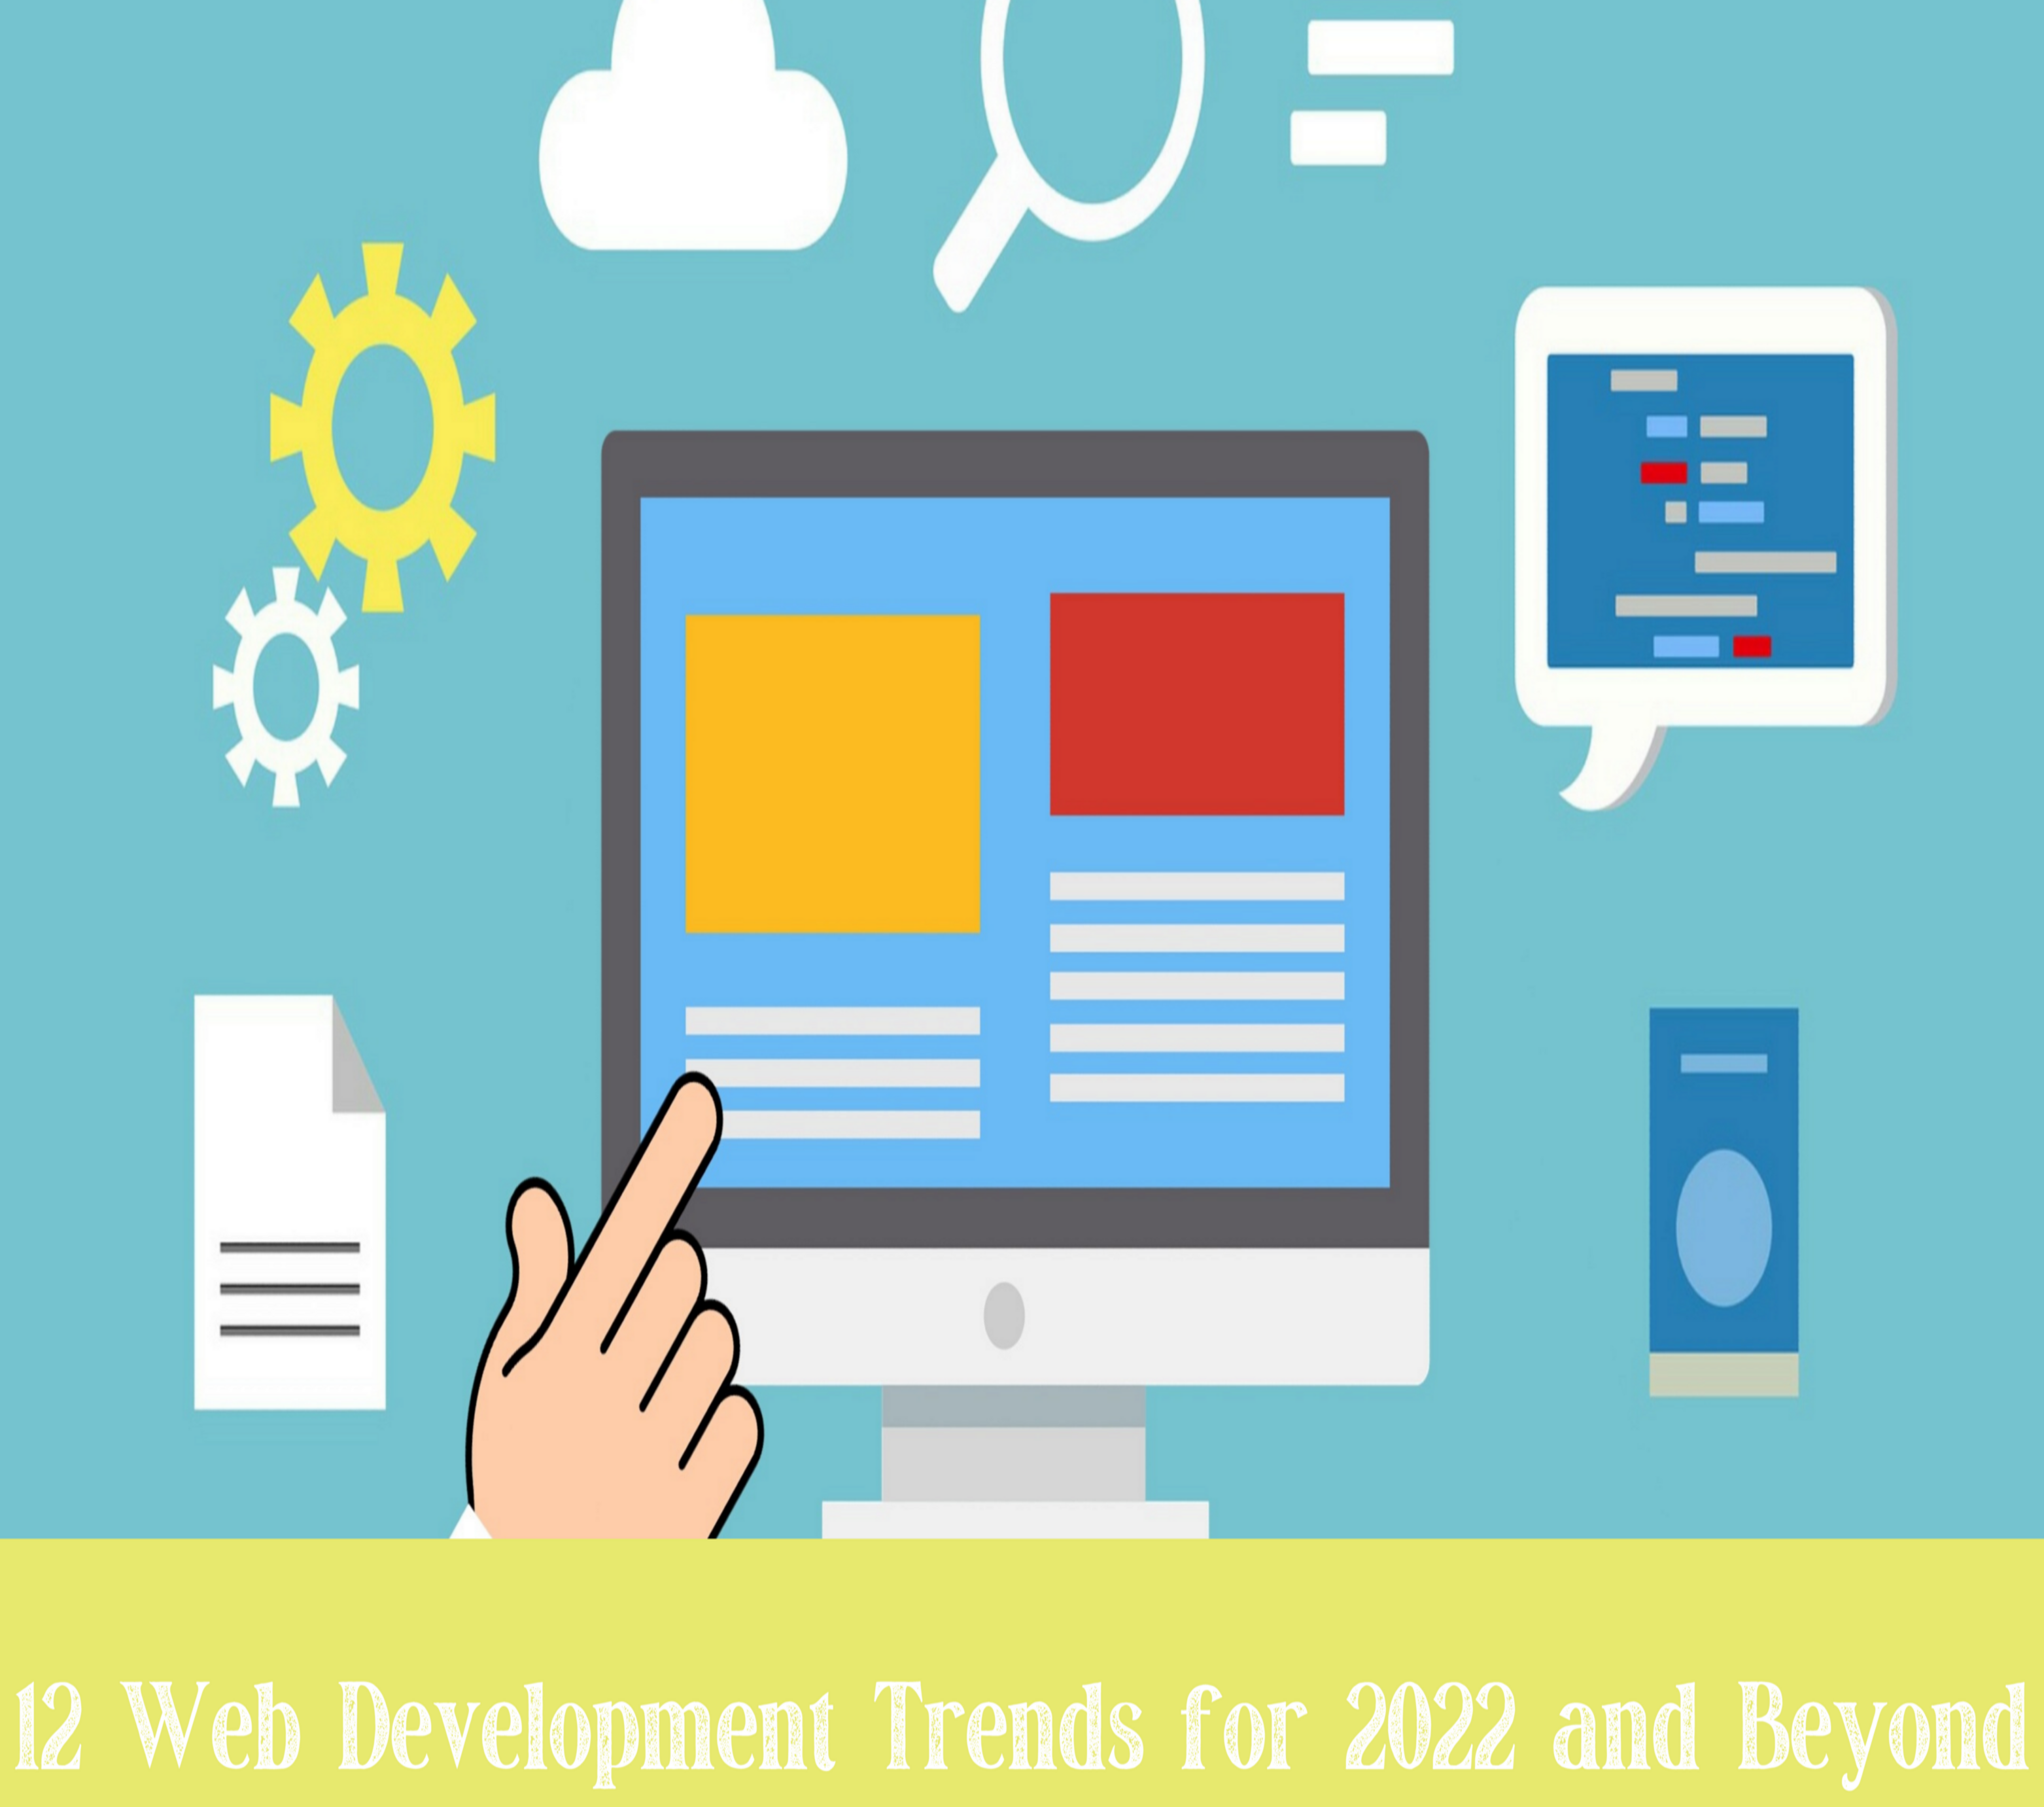 12 Web Development Trends for 2022 and Beyond